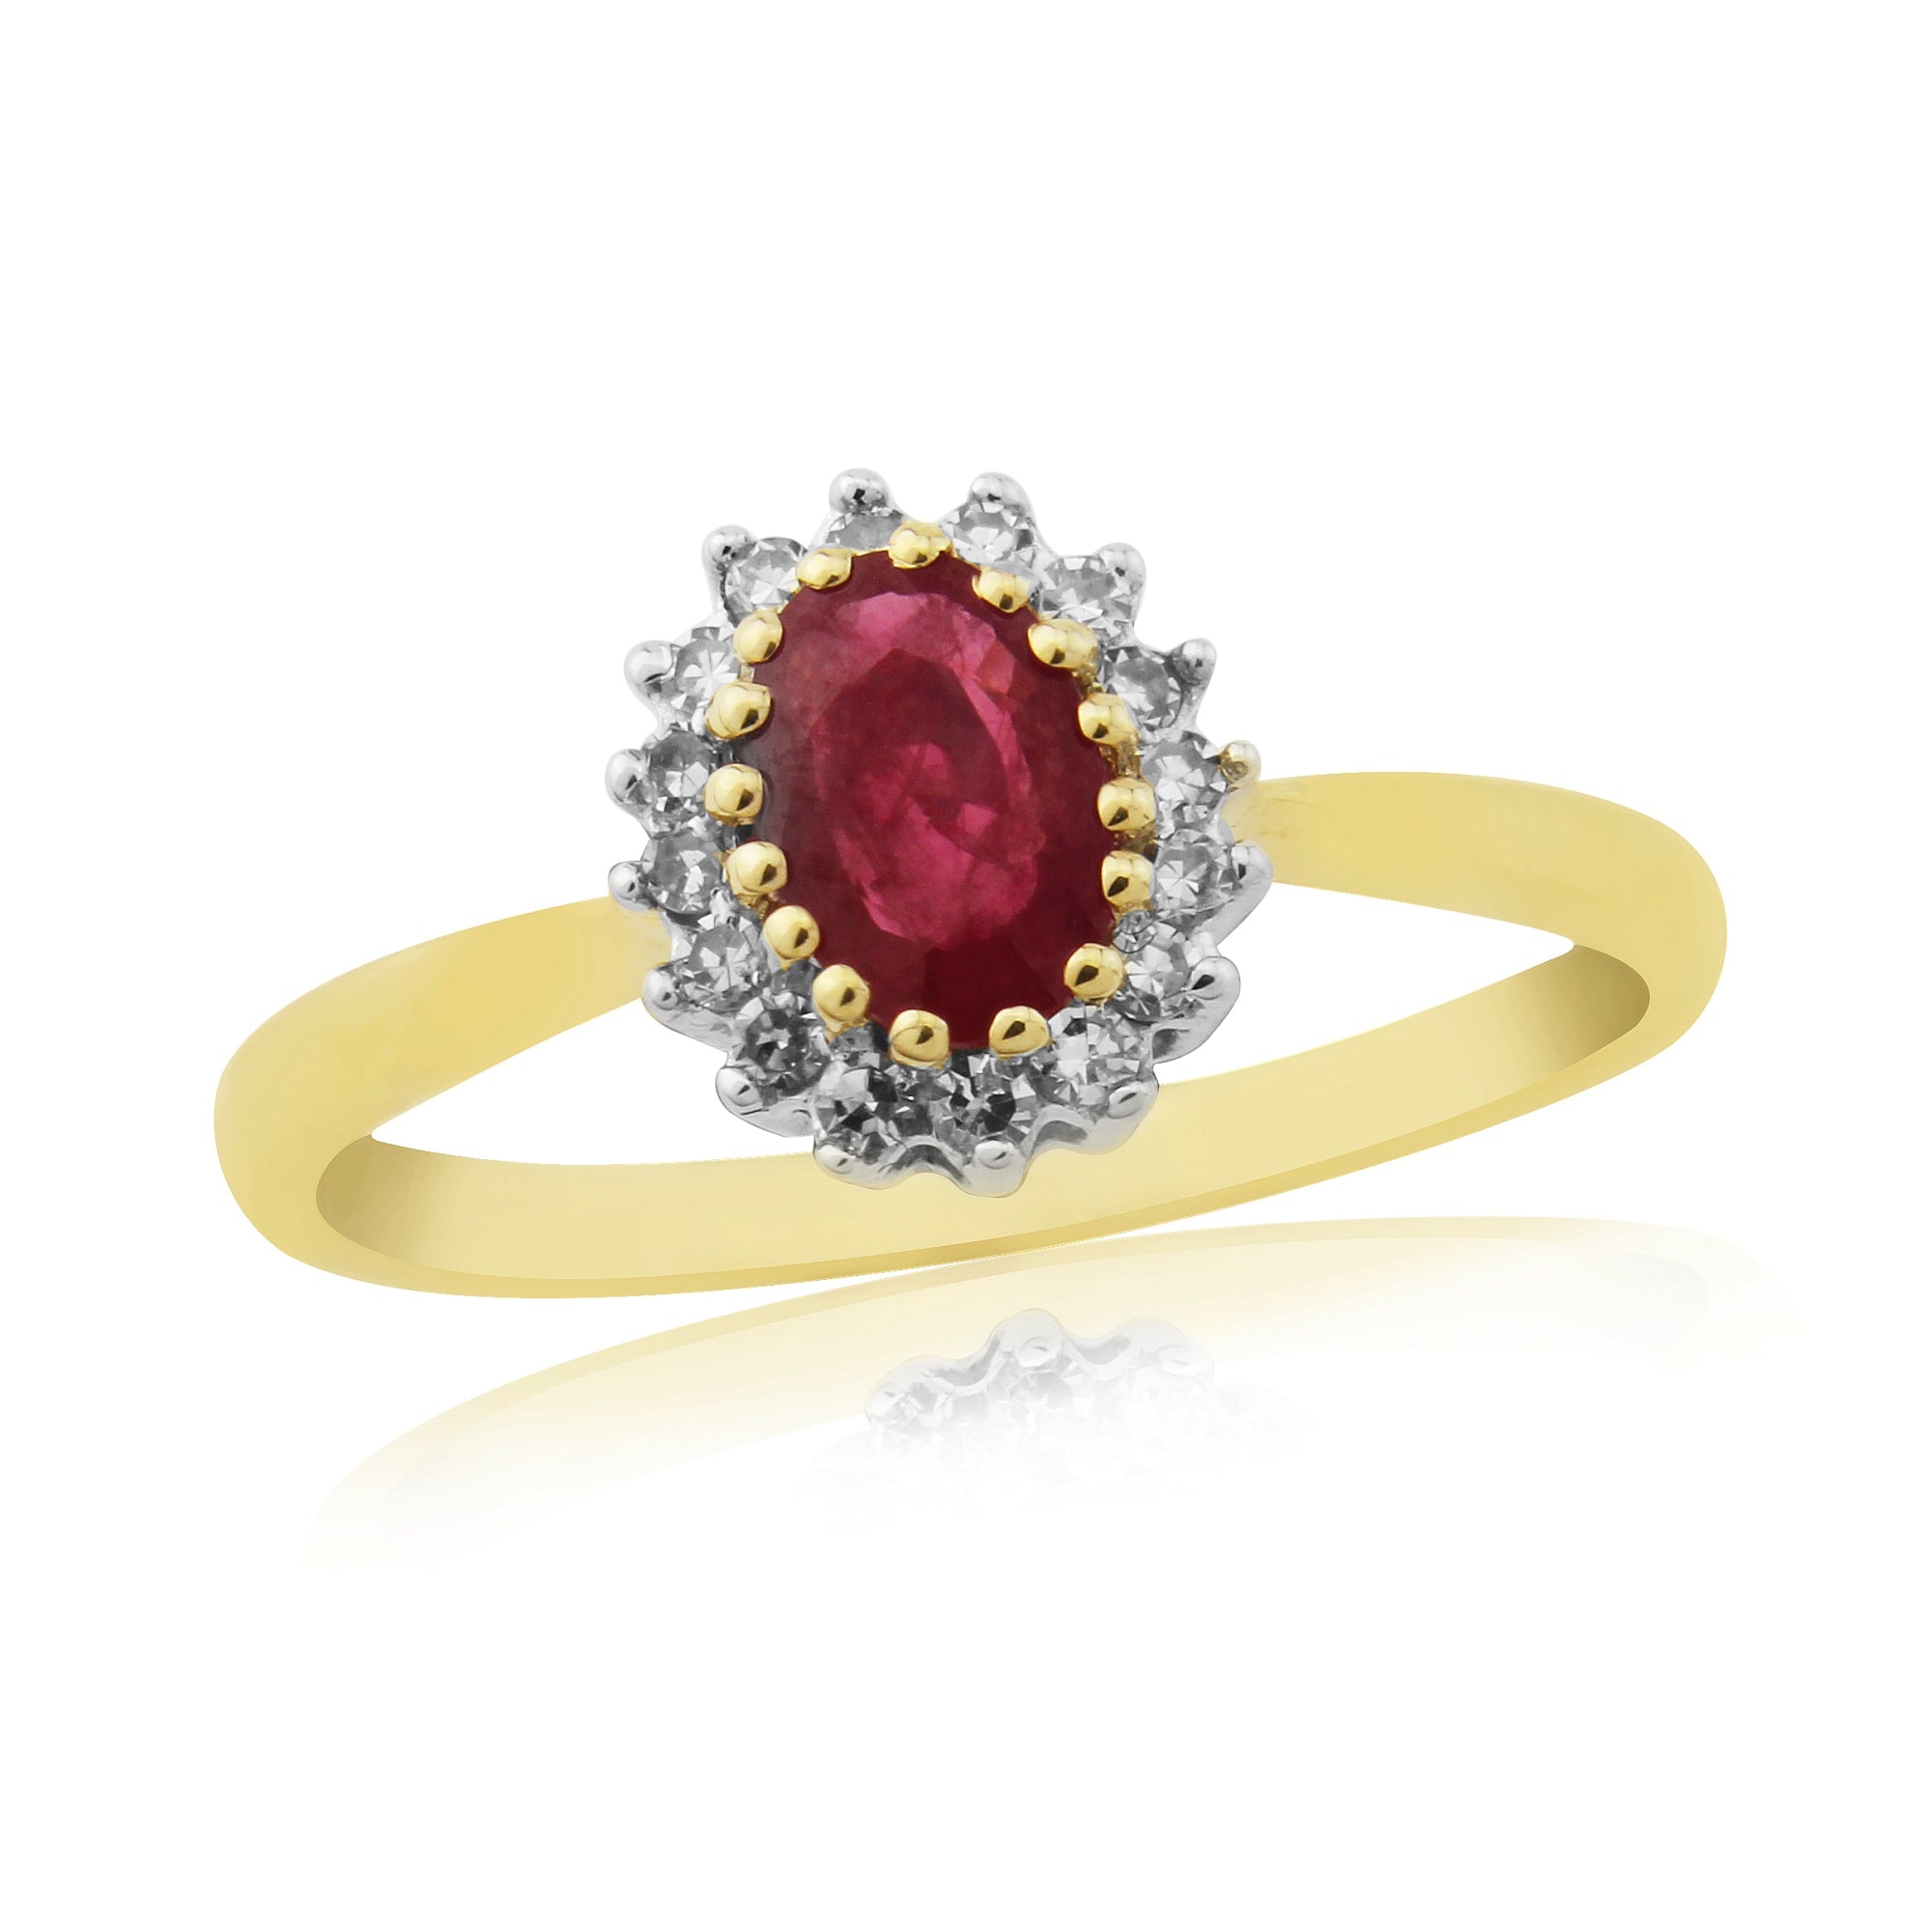 9ct gold 6x4mm oval ruby & diamond cluster ring 0.12ct